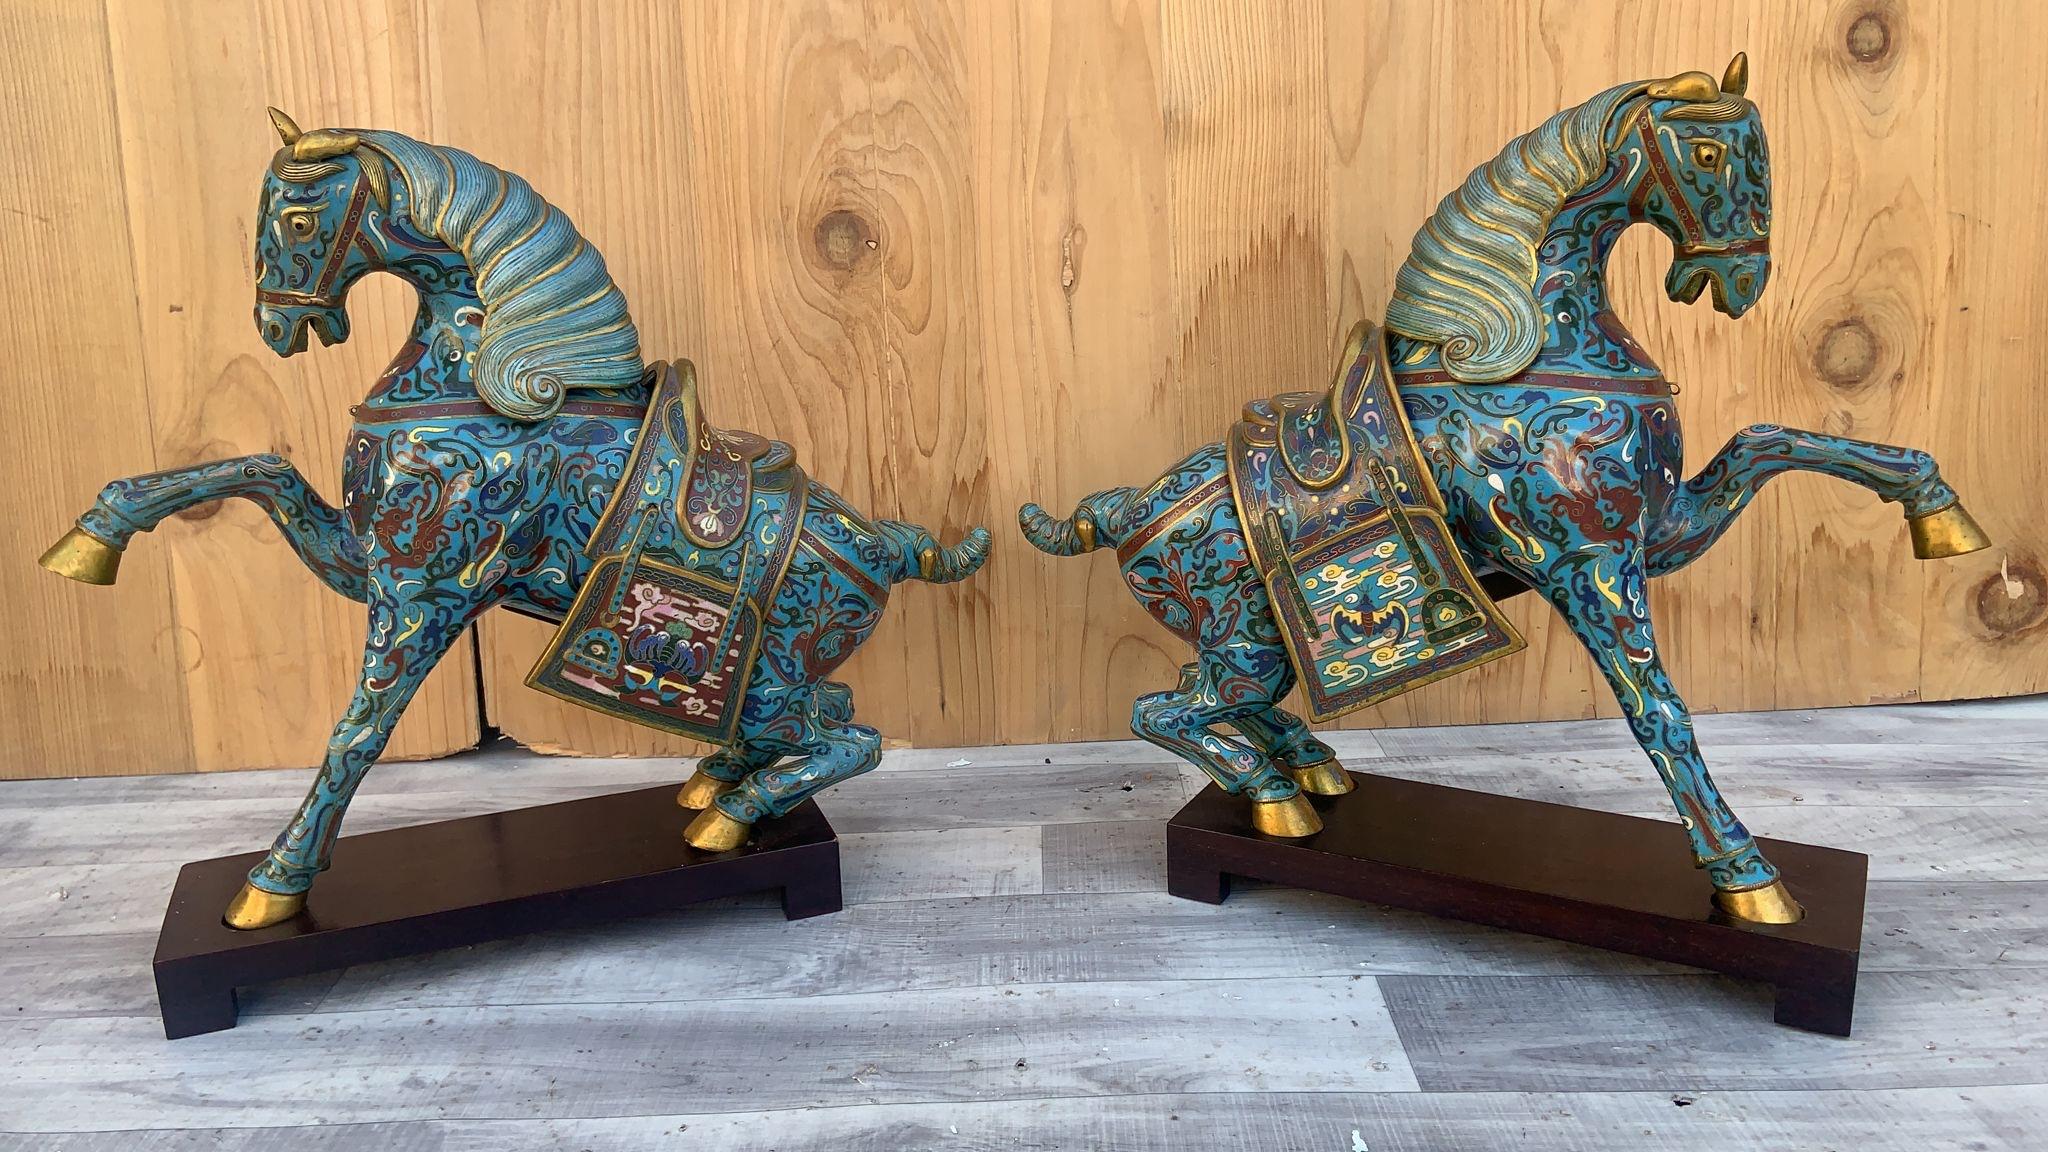 Vintage Chinese Cloisonné War Horse Sculptures on Mahogany Base - Pair 

Exquisite Set of 2 vintage Chinese Cloisonne' war horse sculptures on mahogany bases. Each horse sculpture is substantial in size in the war horse stance and is beautifully